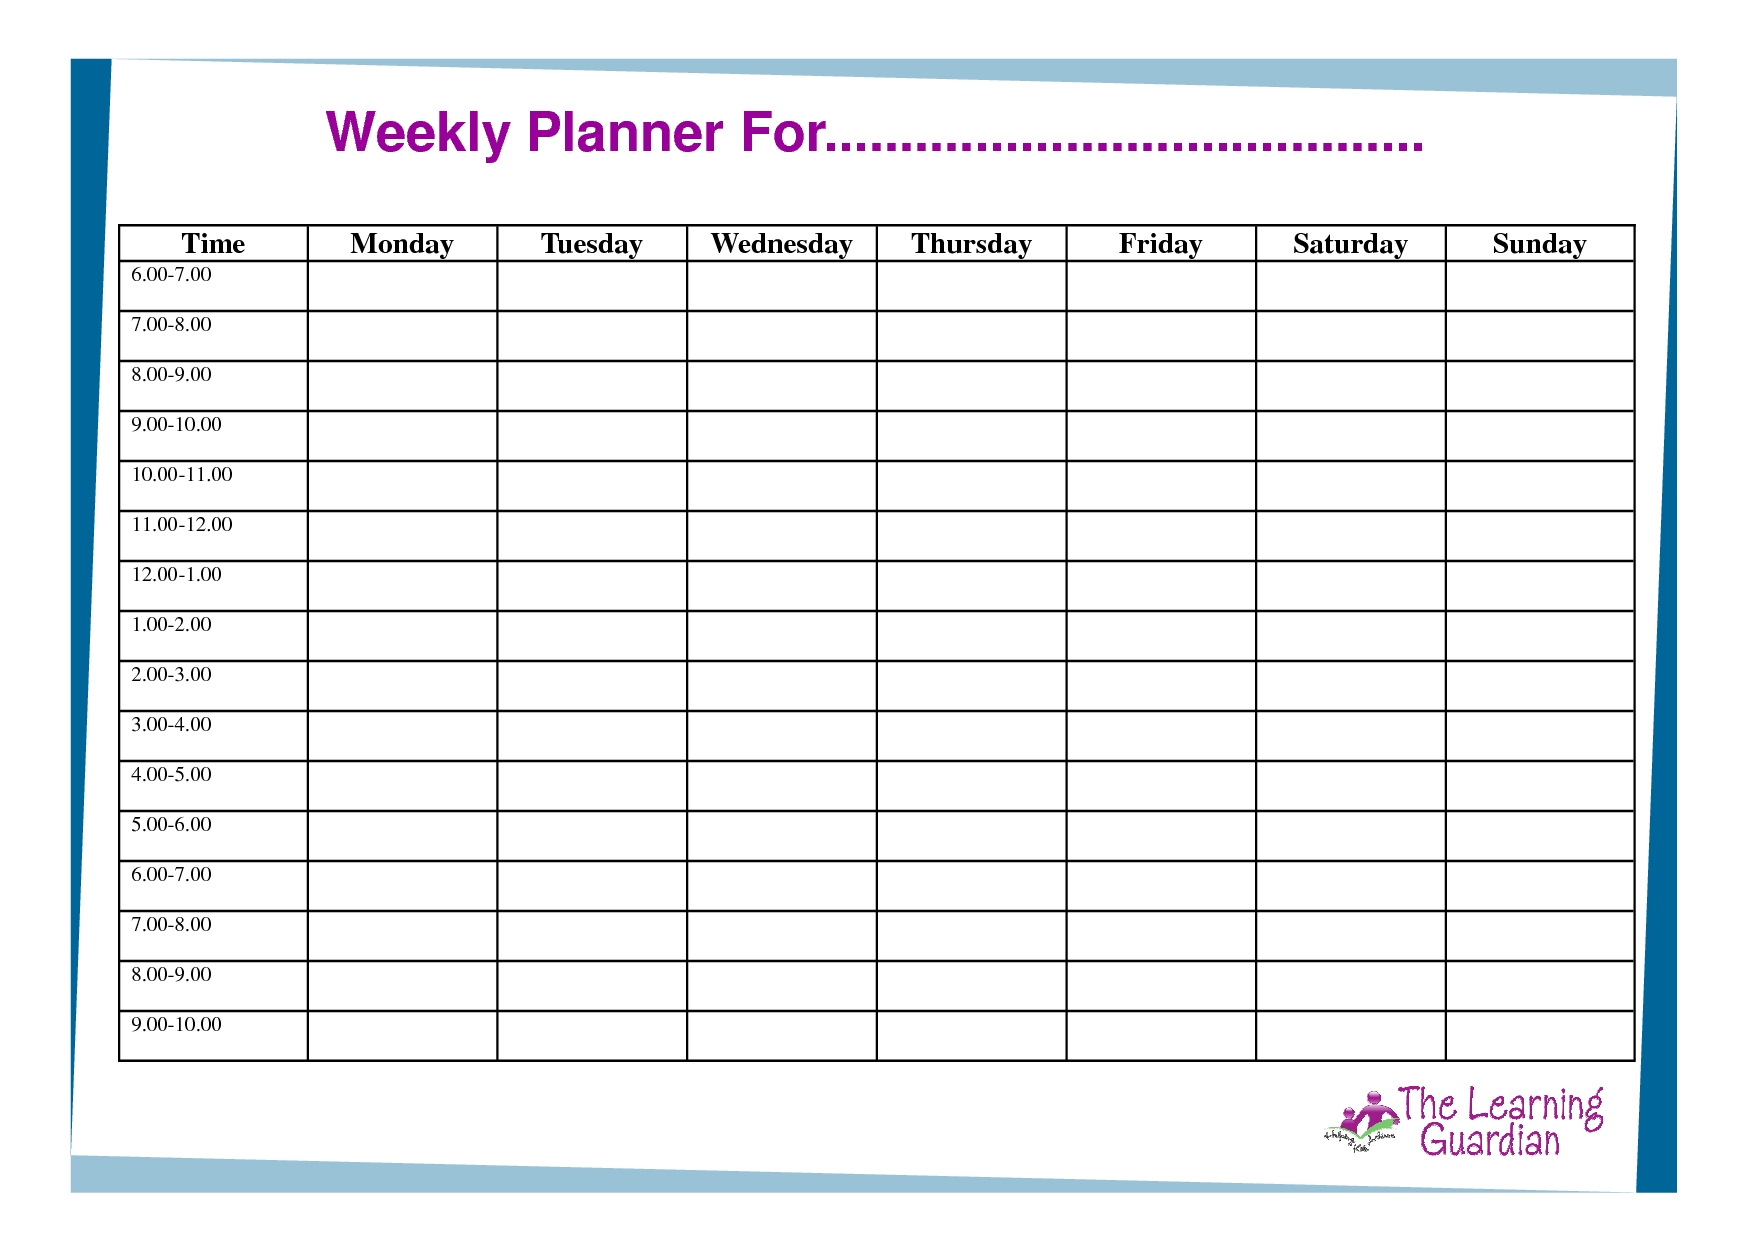 Online Daily Time Slot Planner  Template Calendar Design intended for Printable Day Calendar With Time Slots